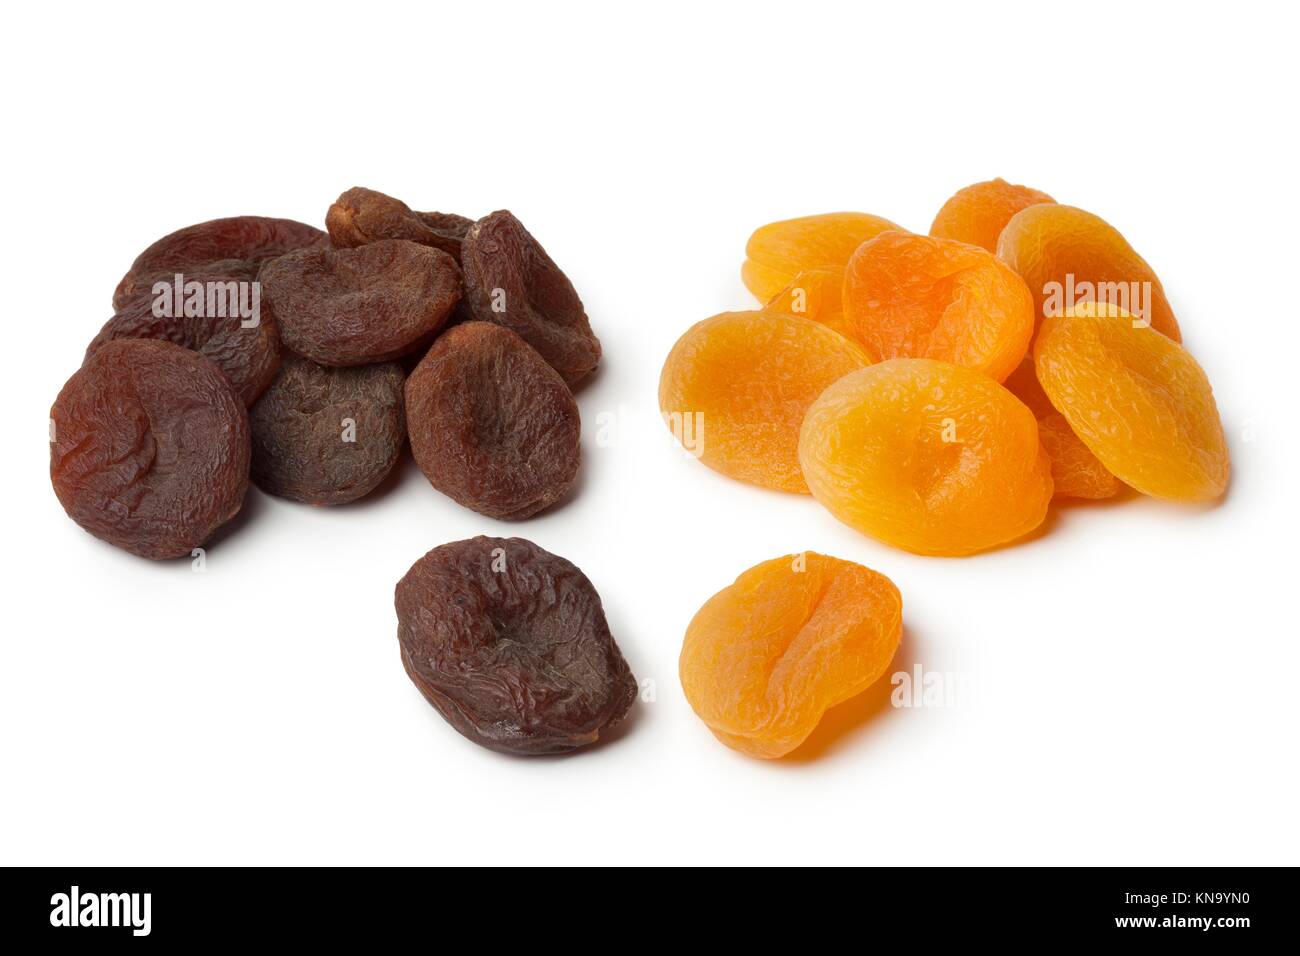 Heap of healthy nutritious brown and orange dried apricot fruit on white background. Stock Photo